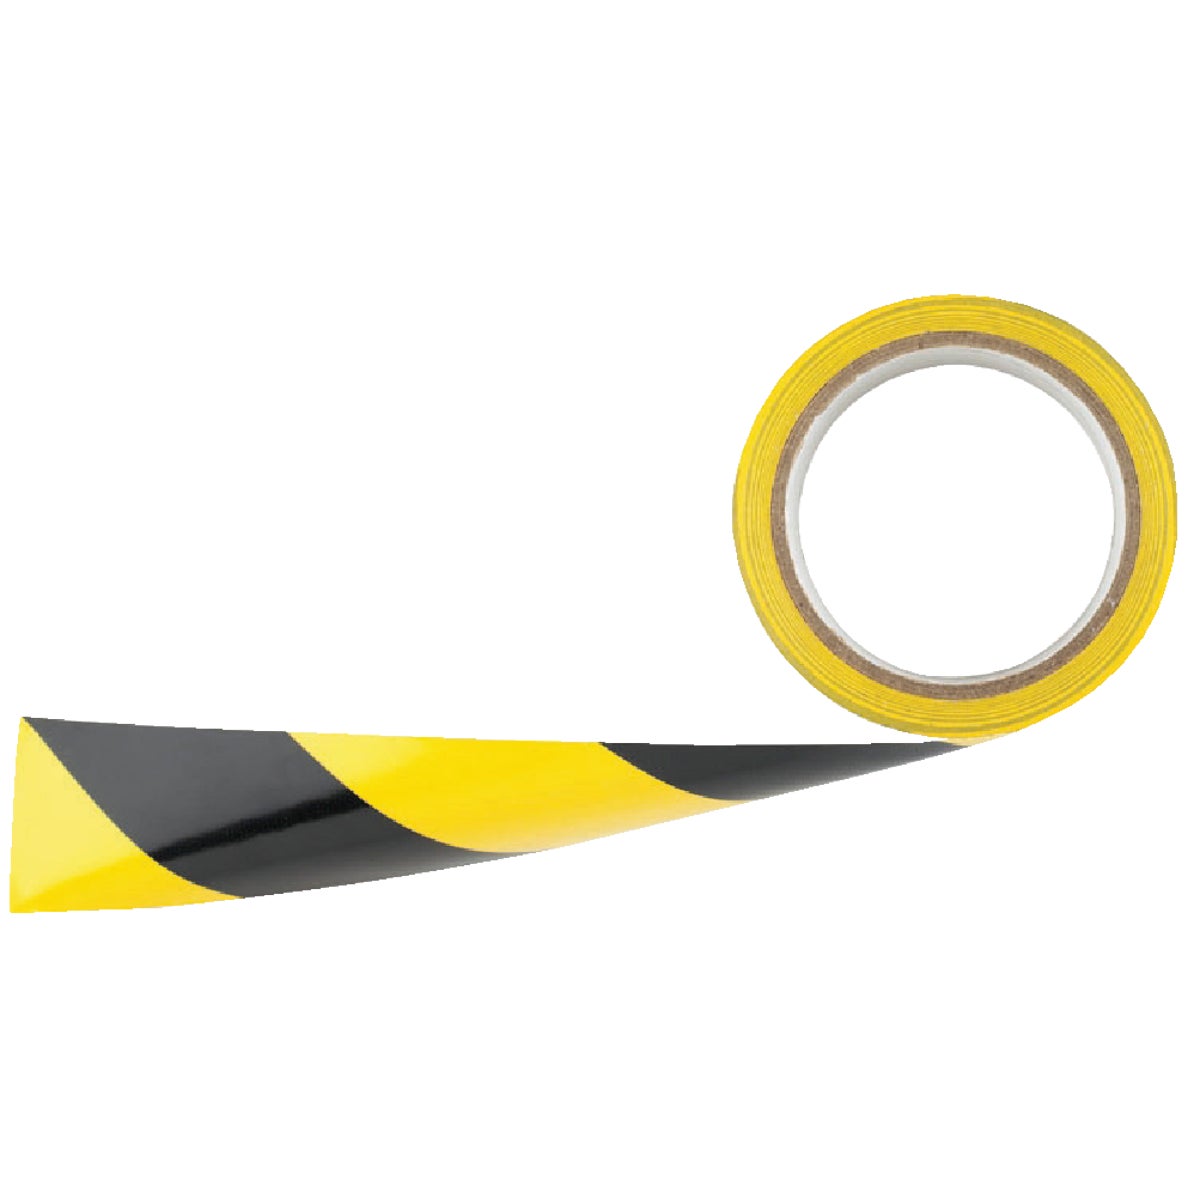 Item 360104, Yellow and black striped caution tape ideal for marking aisles.